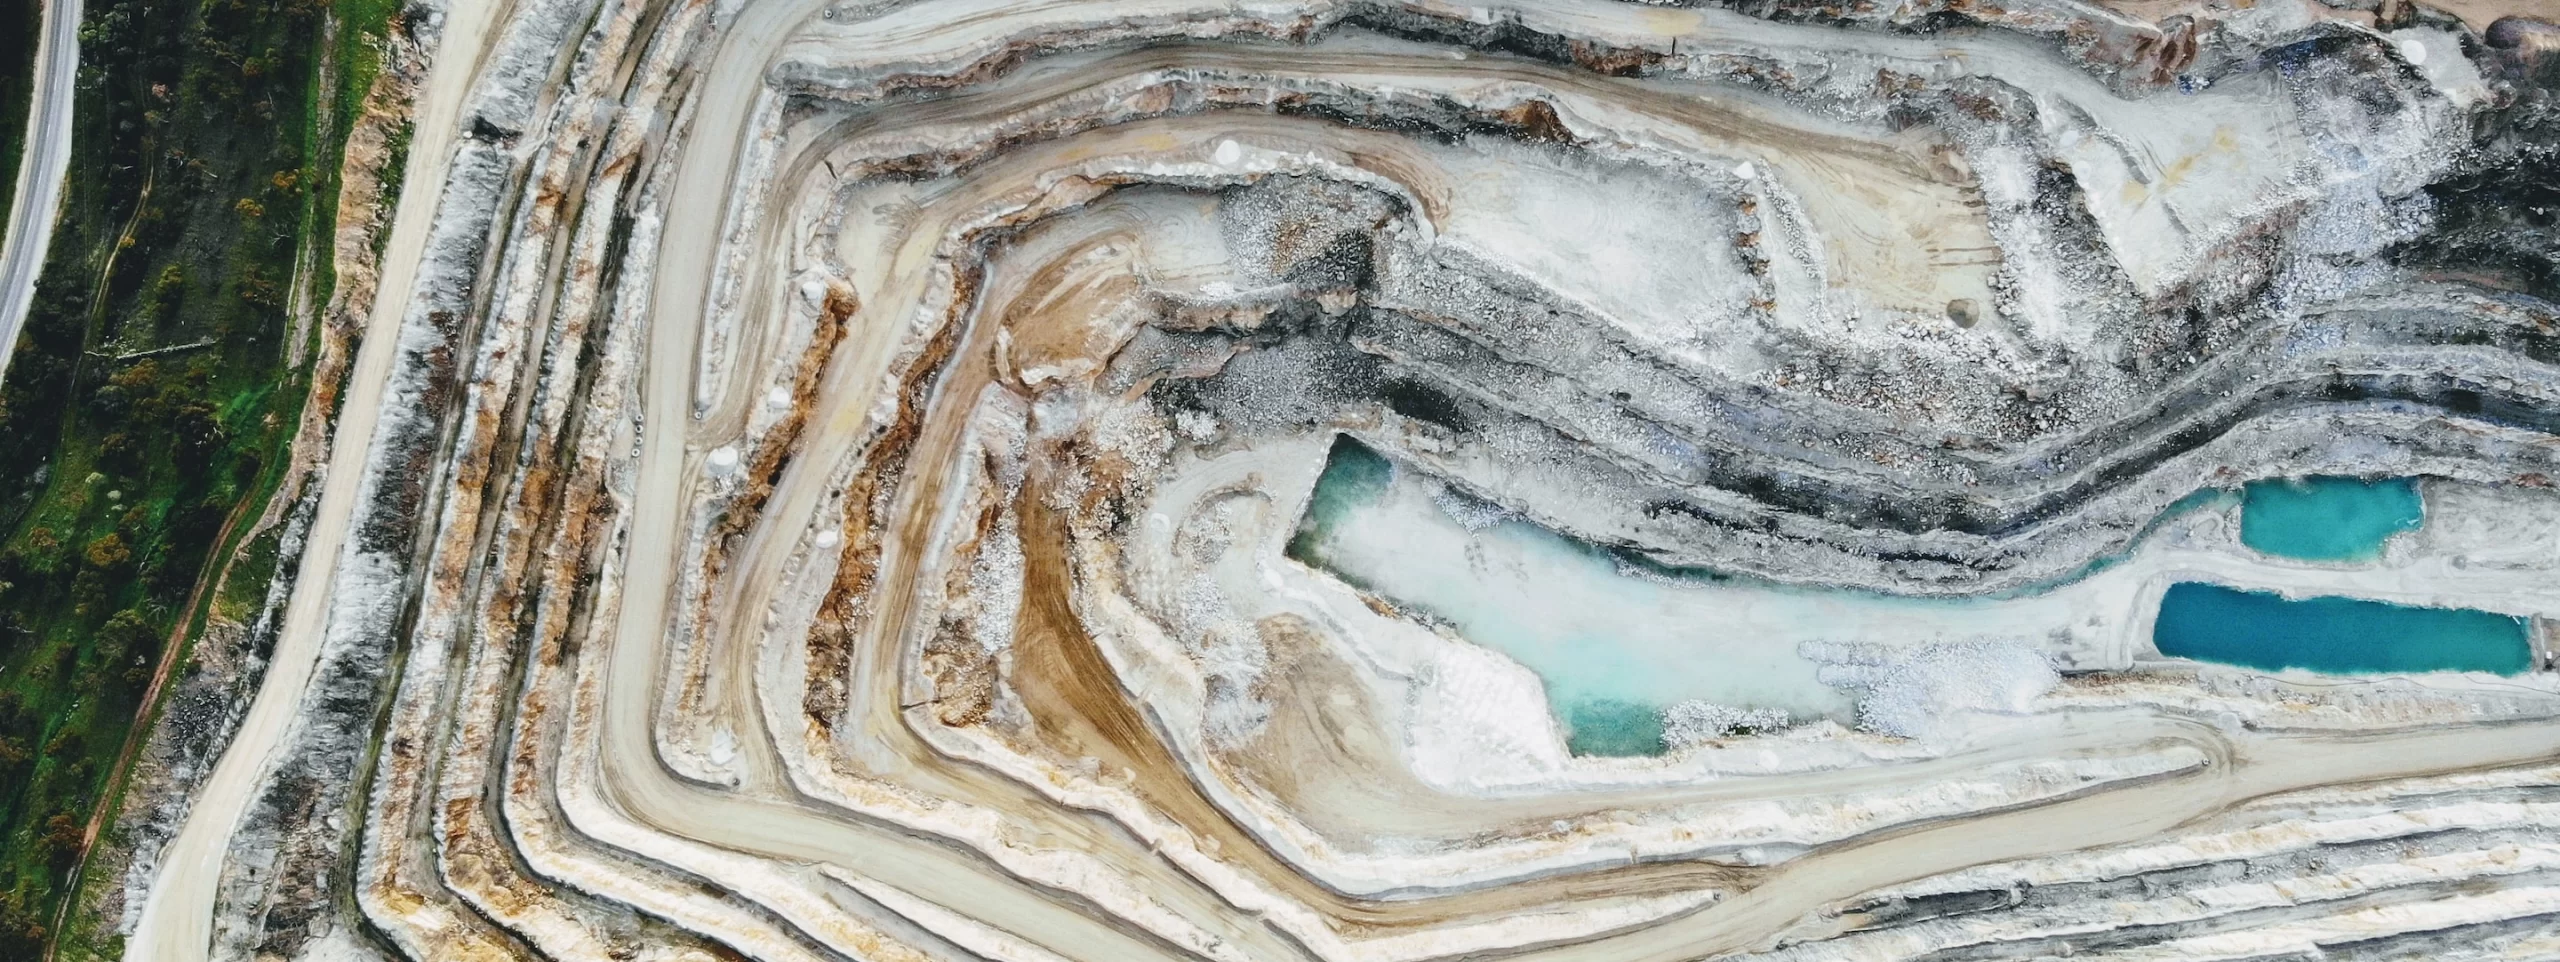 An aerial view of a quarry showcasing mining operations.